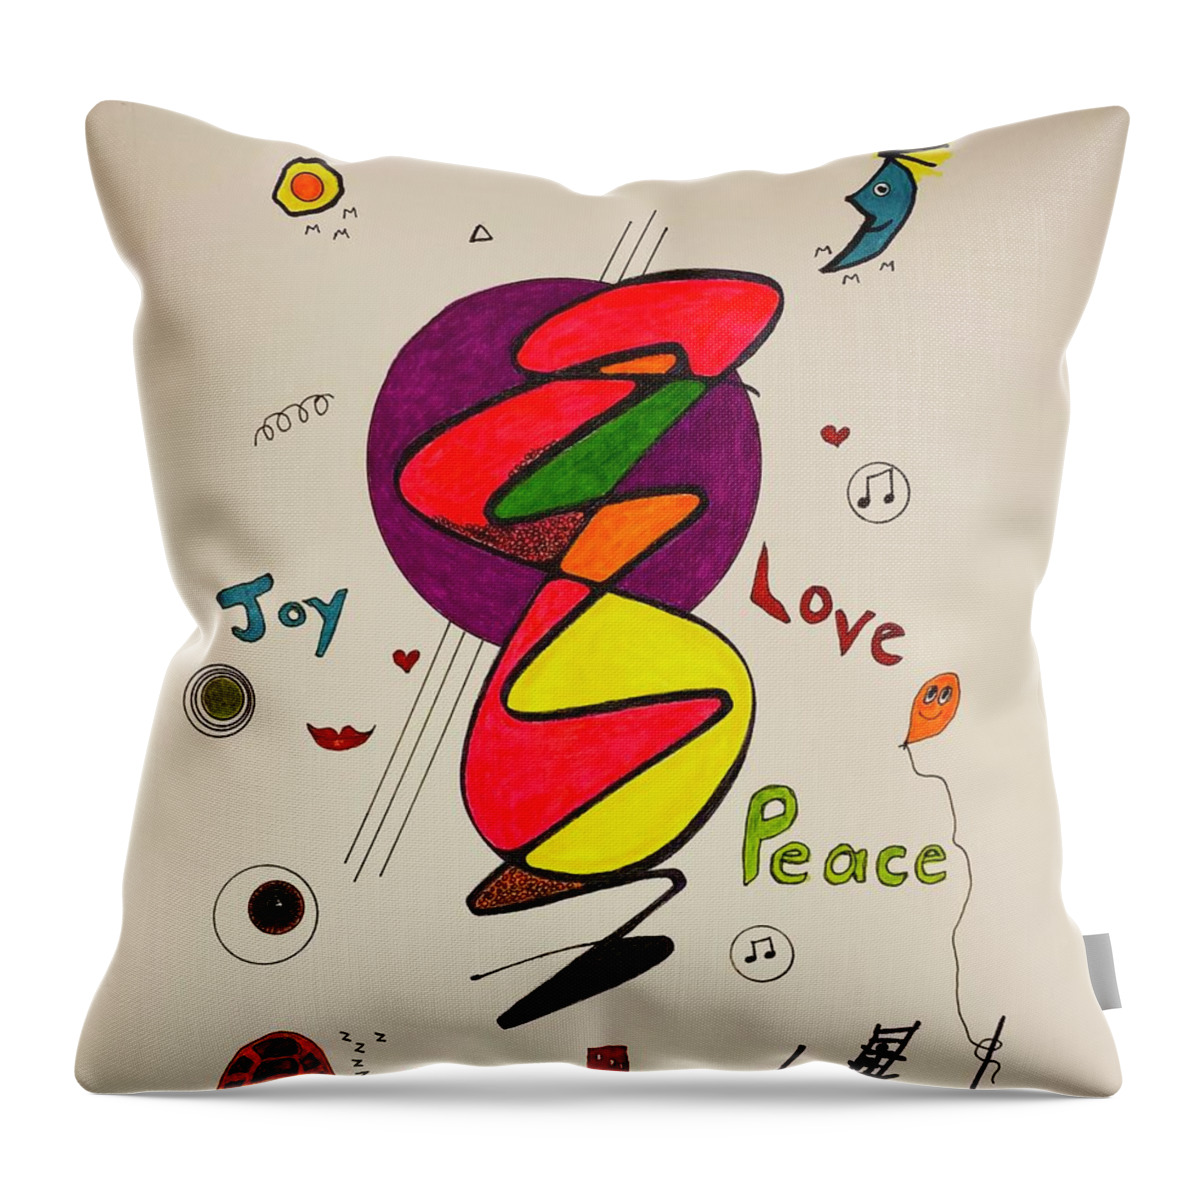  Throw Pillow featuring the mixed media Joy Love Peace 1114 by Lew Hagood